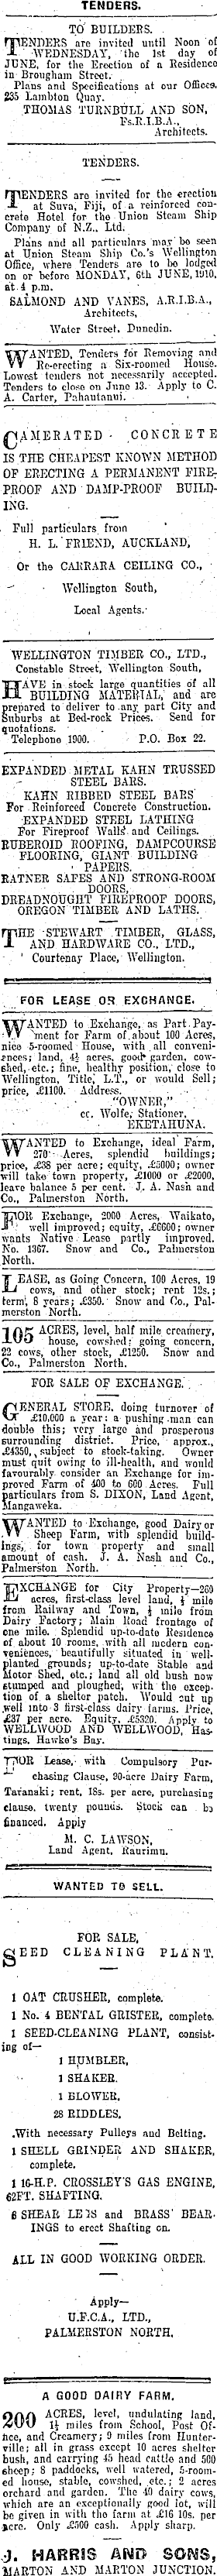 Papers Past Newspapers Dominion 31 May 1910 Page 10 Advertisements Column 1